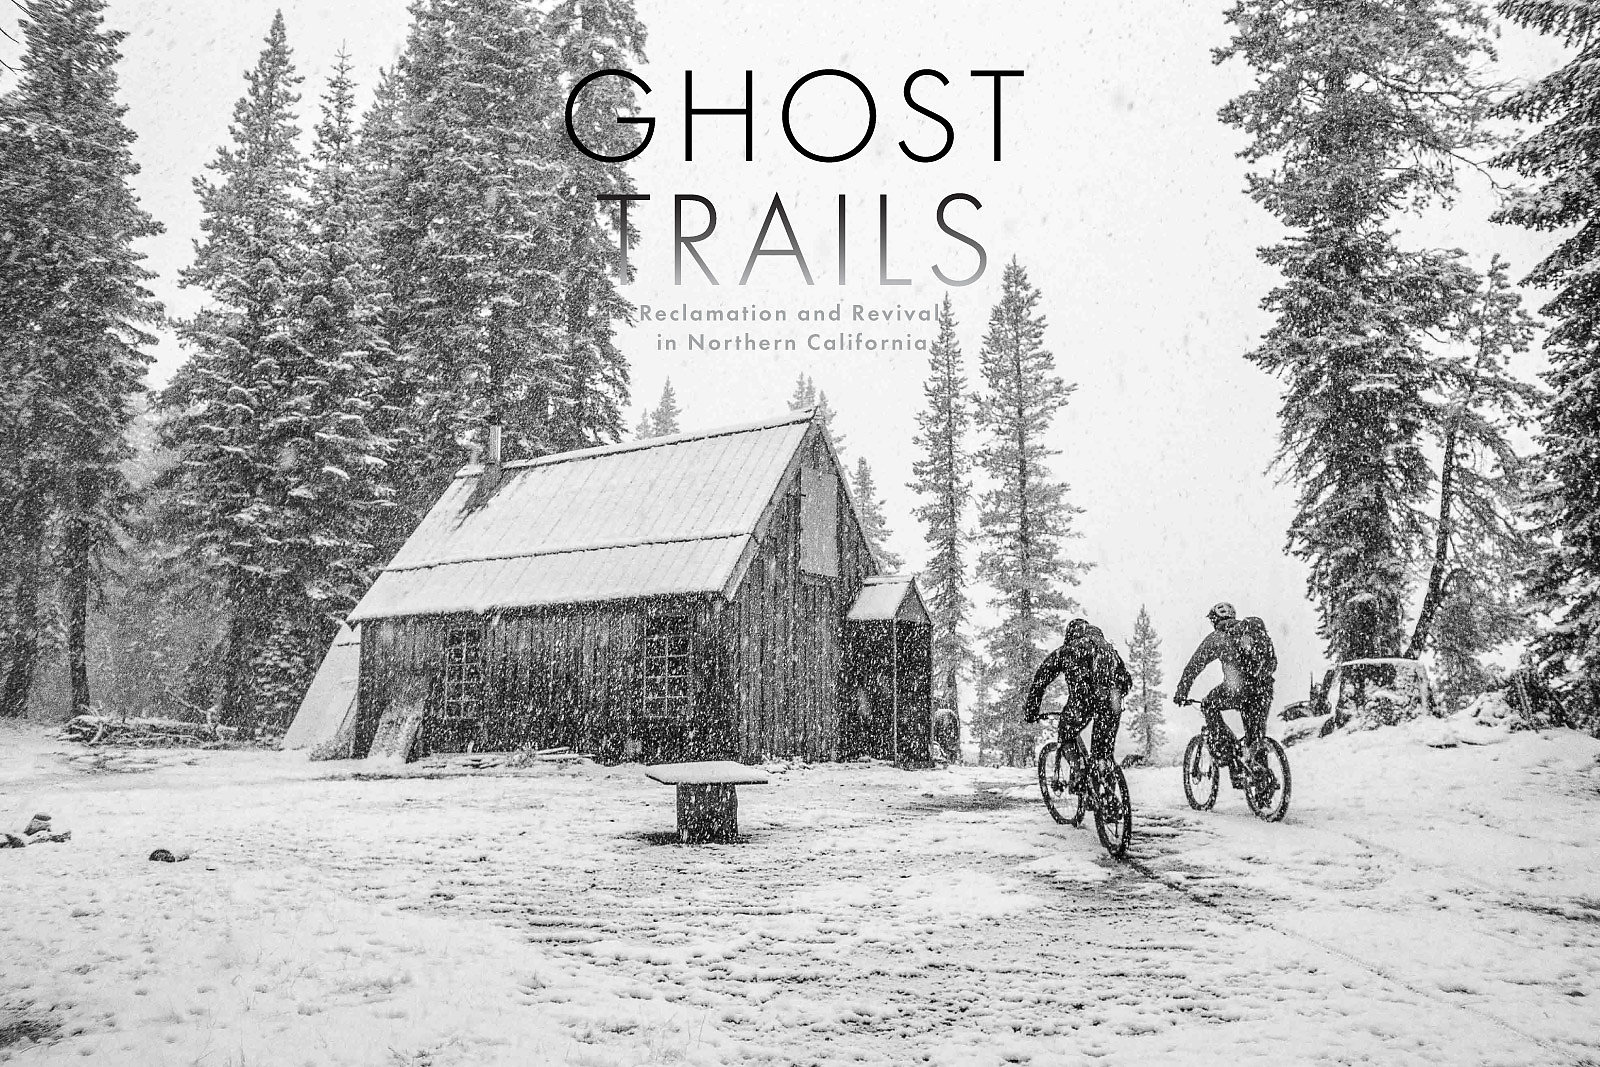 Ghost Trails from Freehub Magazine Issue 9.1